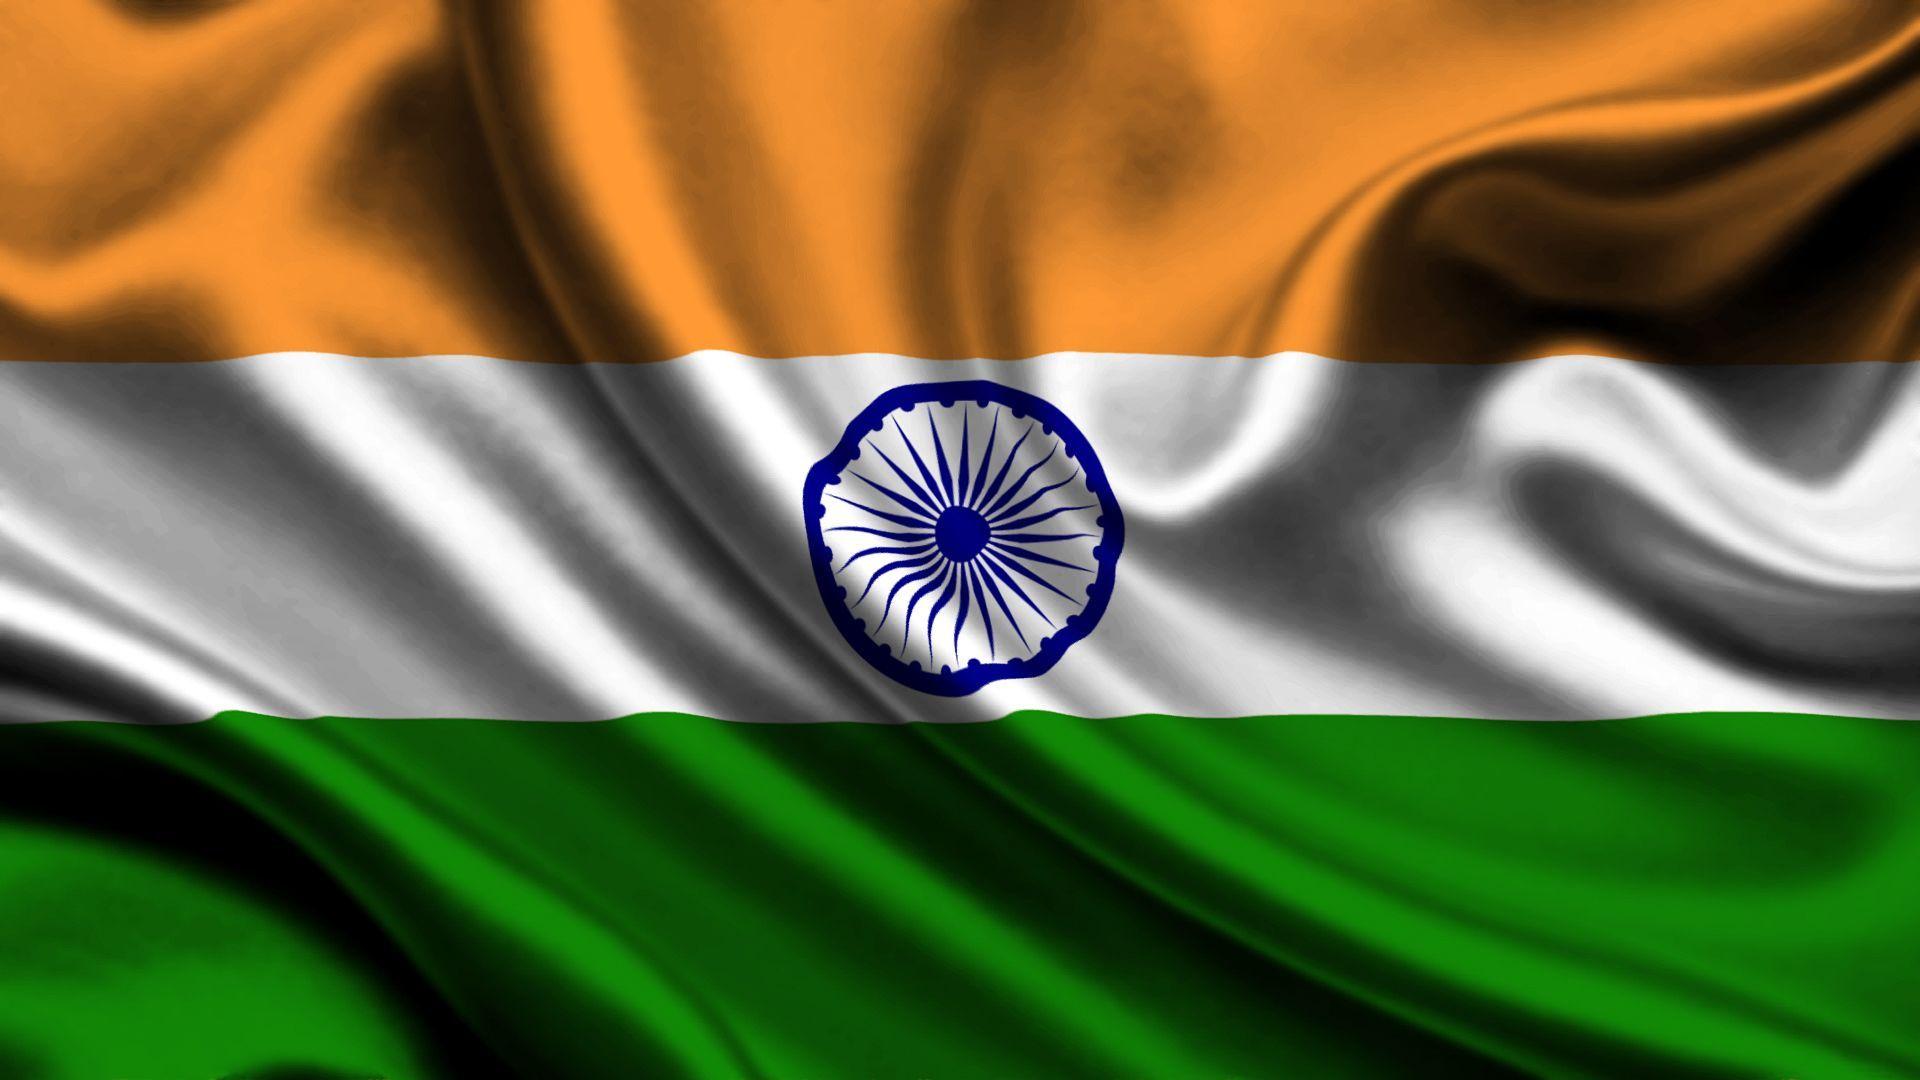 Indian Flag Hd Wallpapers Top Free Indian Flag Hd Backgrounds Wallpaperaccess